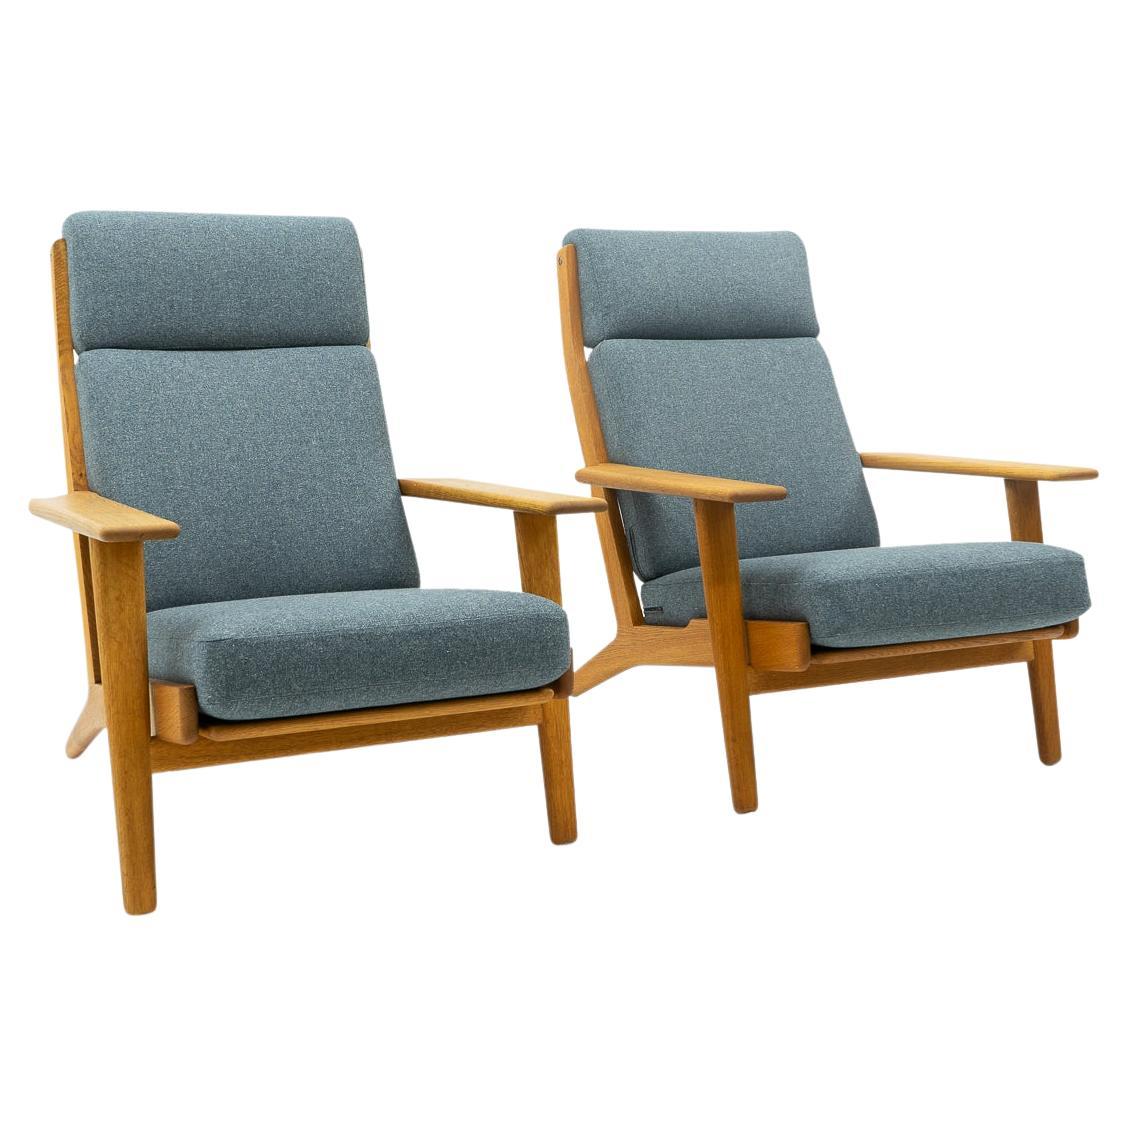 Danish Design Classic GE 290 Arm Chairs by Hans Wegner for Getama, 1960s For Sale